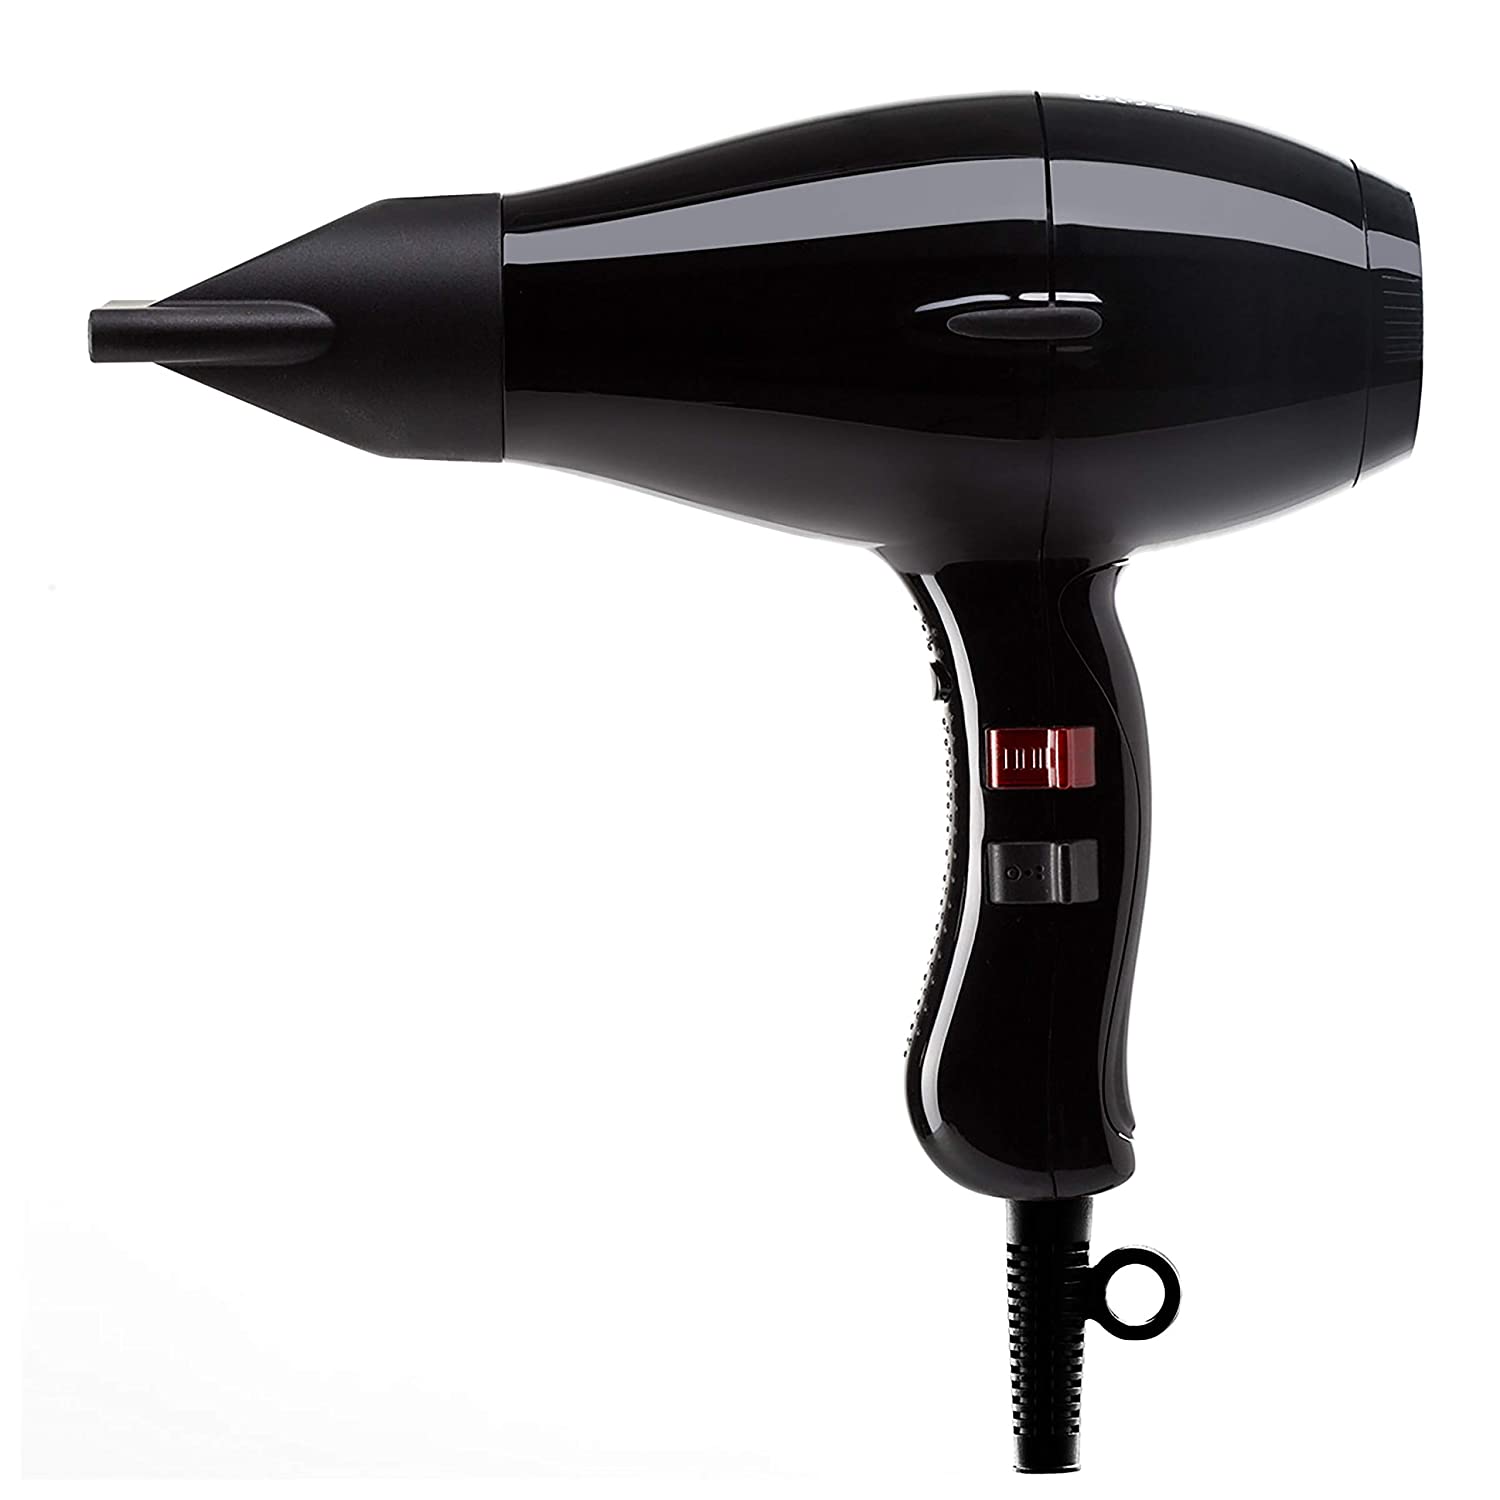 top 10 best hair dryers 2020 best blowdryers for every hair need herstylecode 3 Top 10 Best Hair Dryers 2022 - Best Blowdryers for Every Hair Need